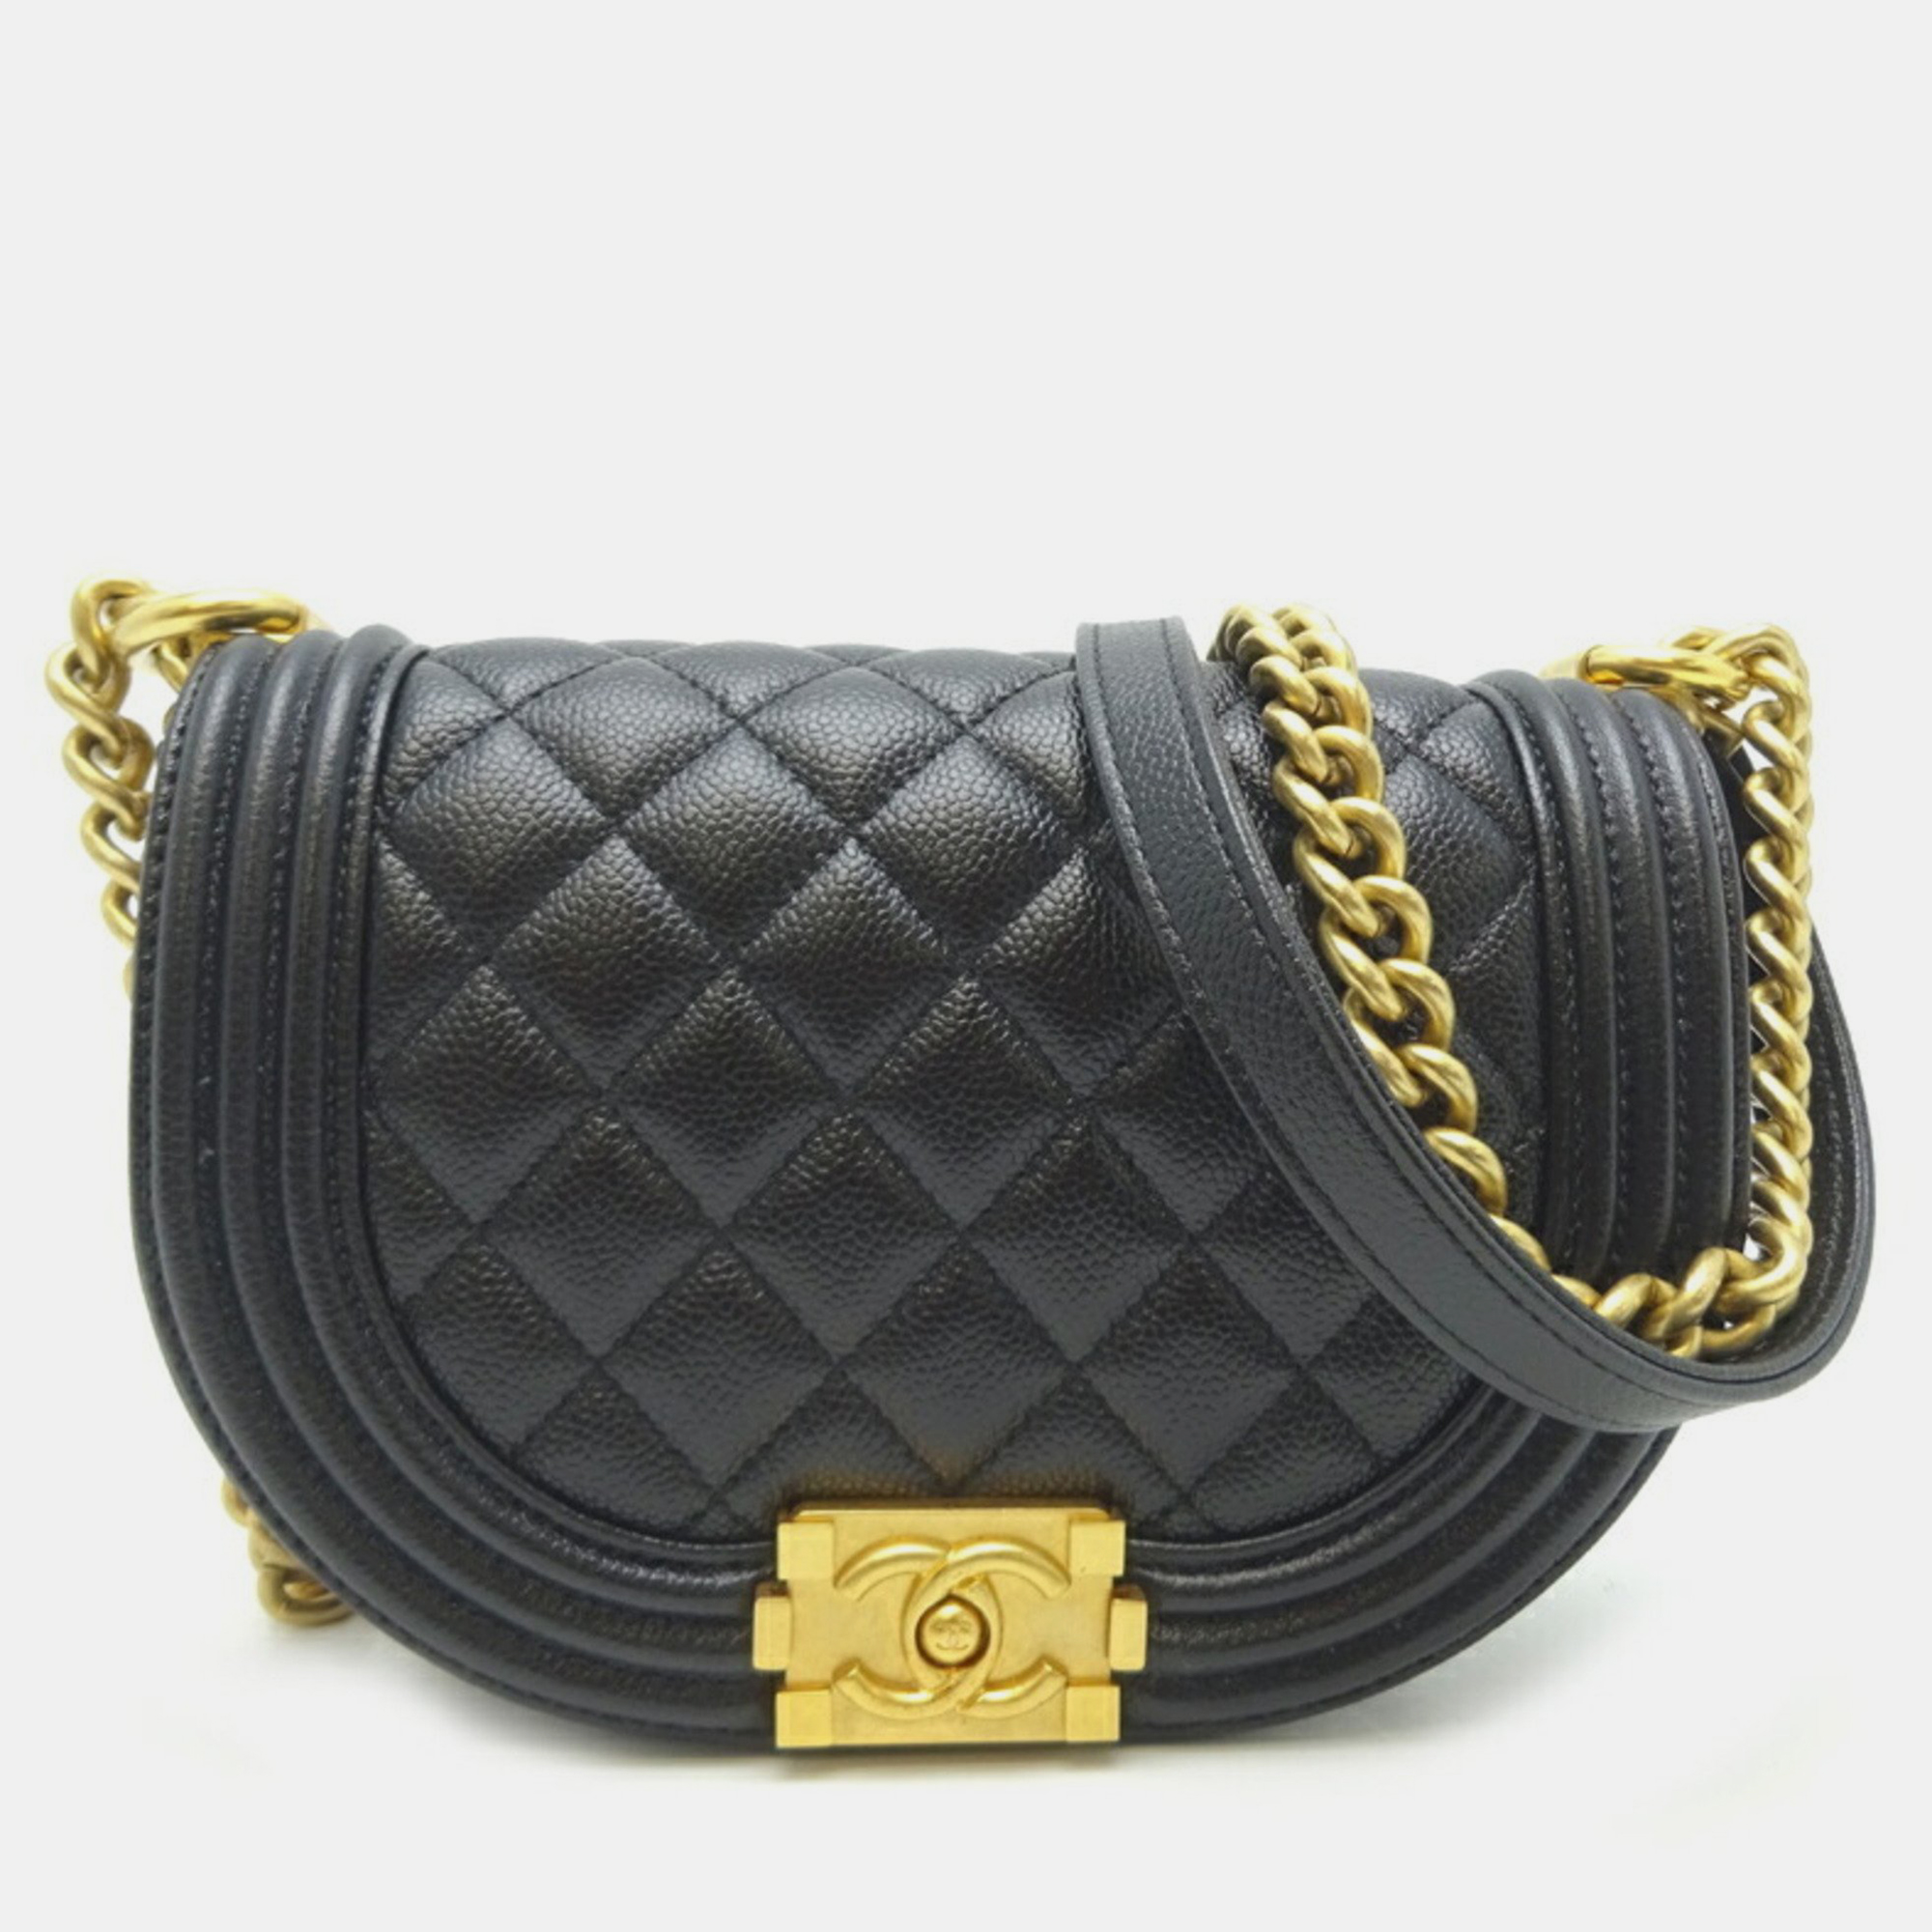 Chanel black quilted caviar small boy curved messenger bag